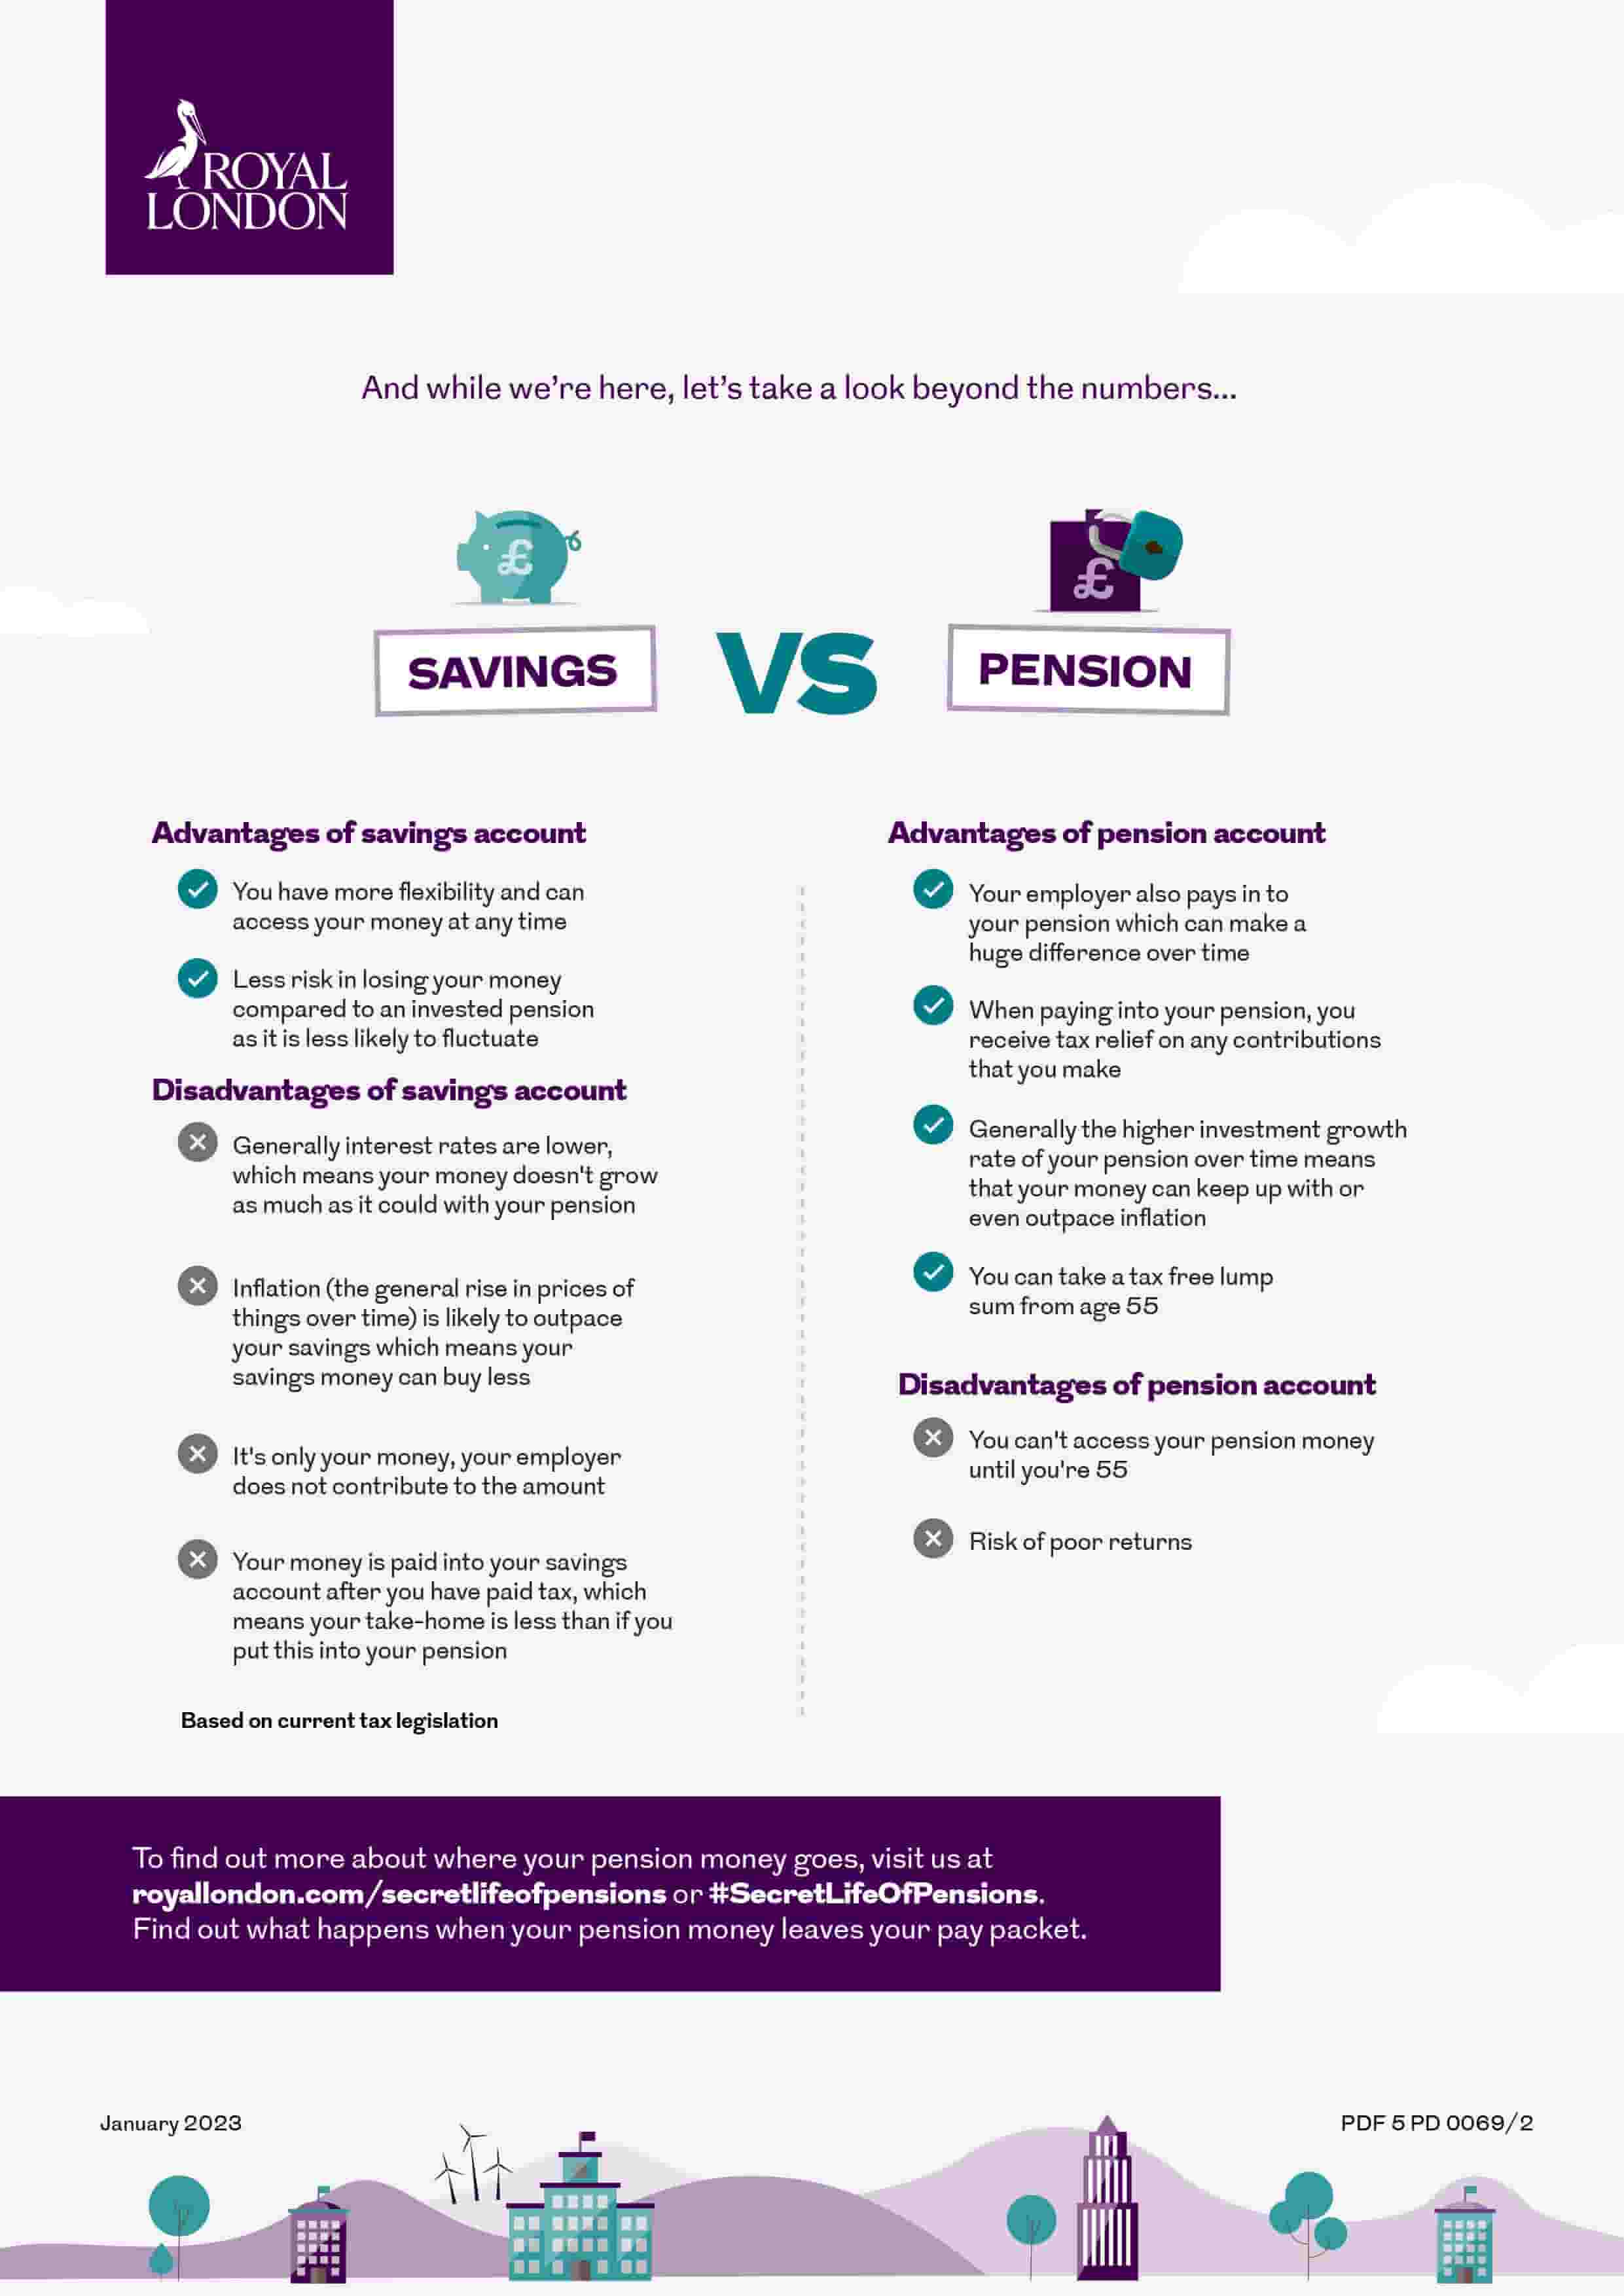 How is your pension different to a savings account infographic part 2. This image is an infographic and has alternative text available if you are using a screen reader.